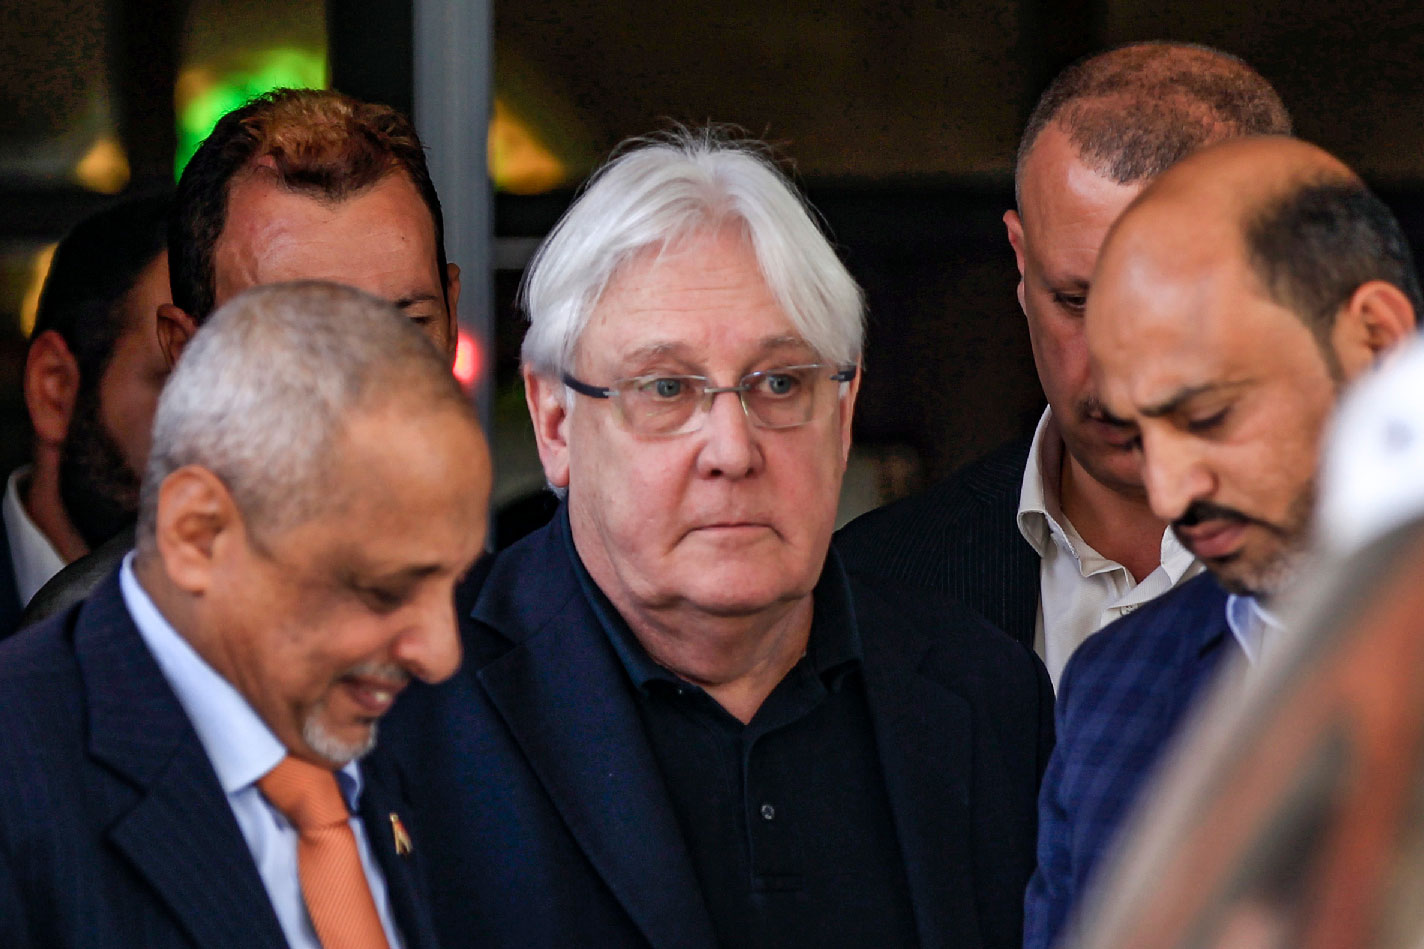 In this file photo taken on February 11, 2019 Martin Griffiths (C), the UN special envoy for Yemen, arrives at Sanaa international airport.